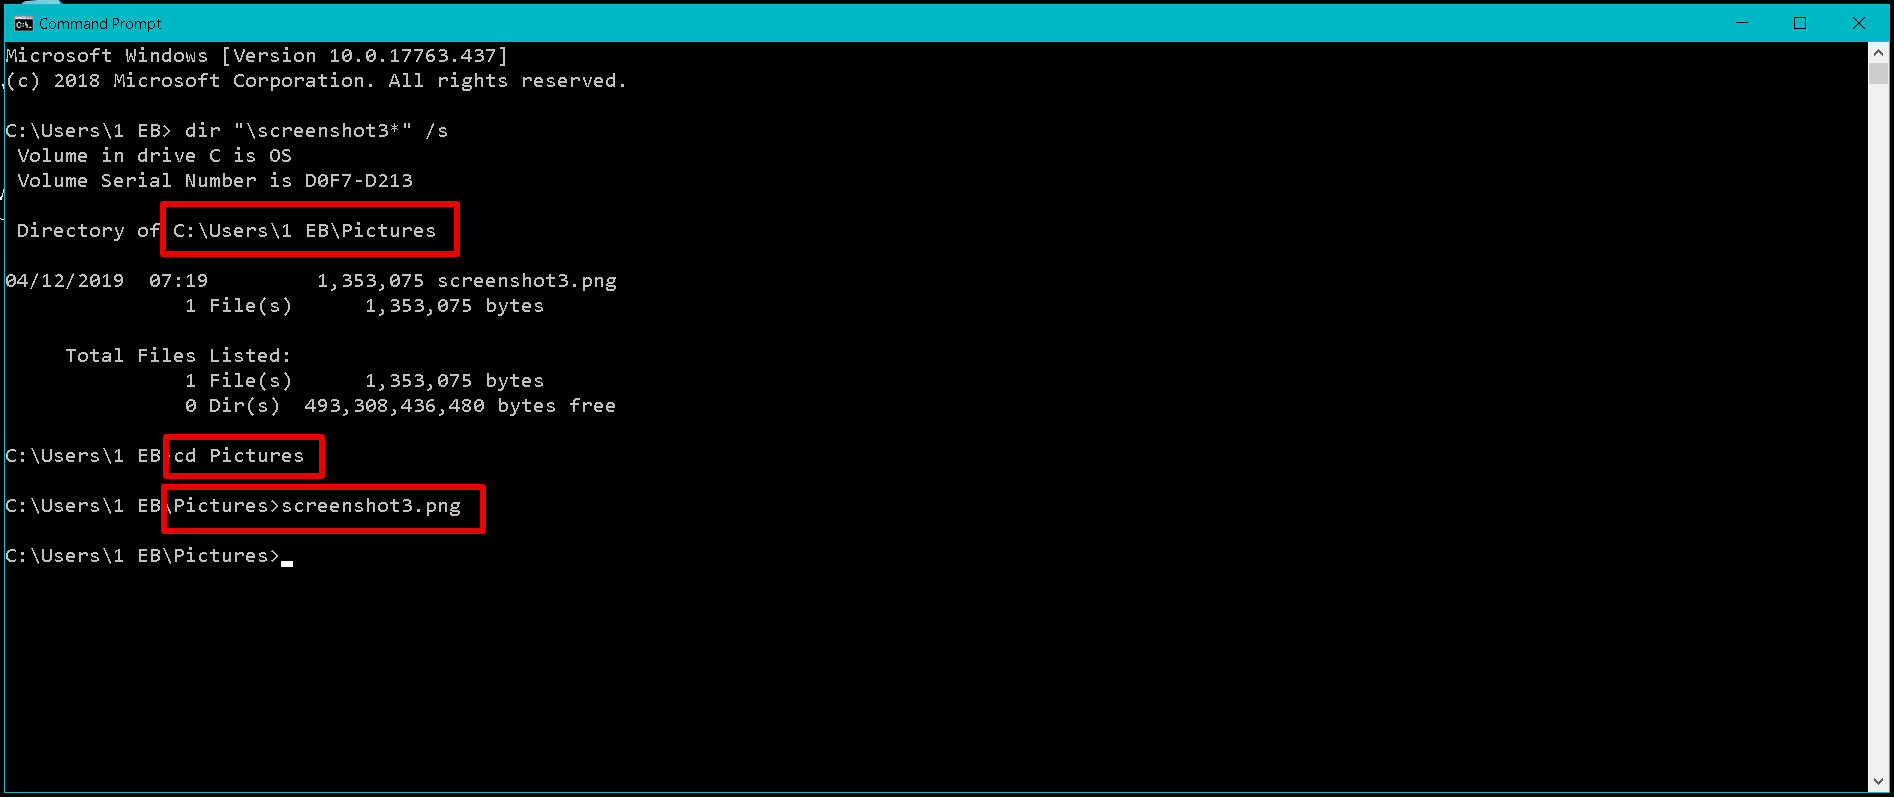 windows find files by date command line